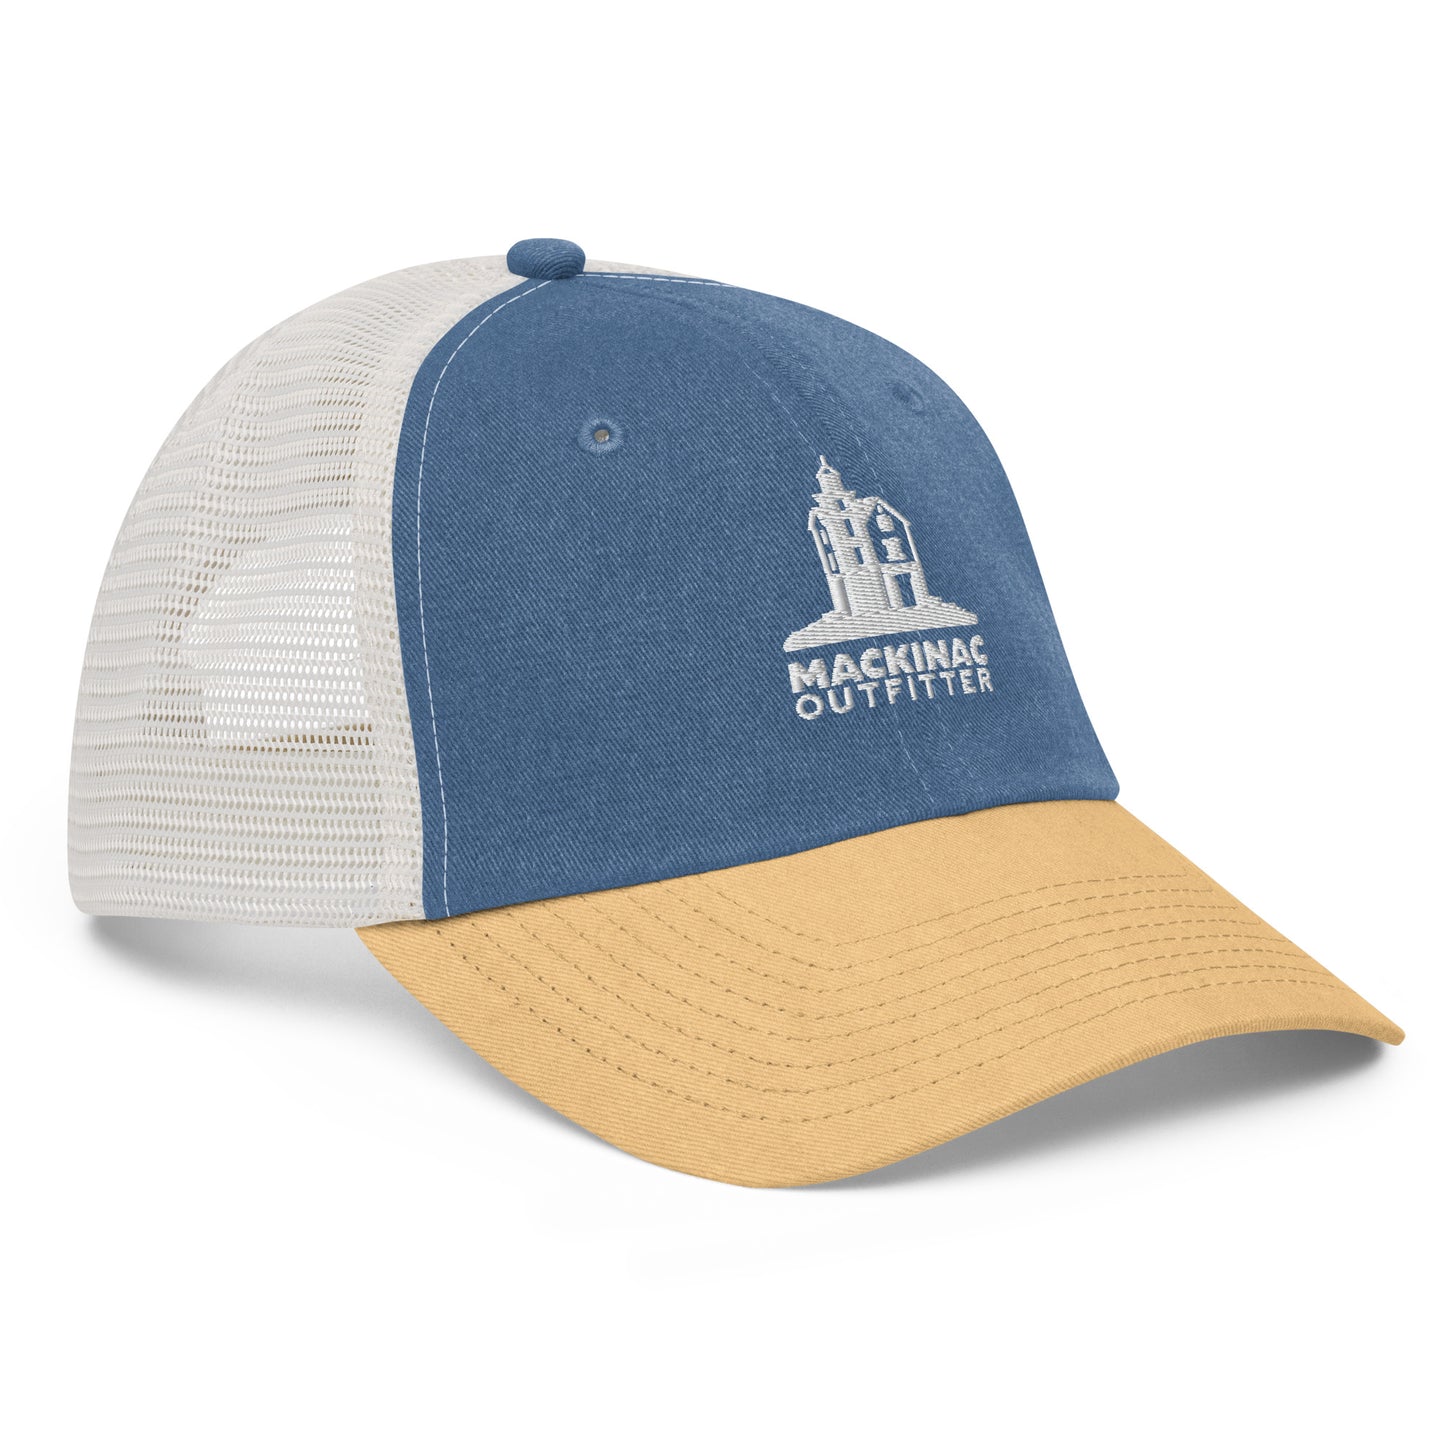 Outfitter Classic Cap